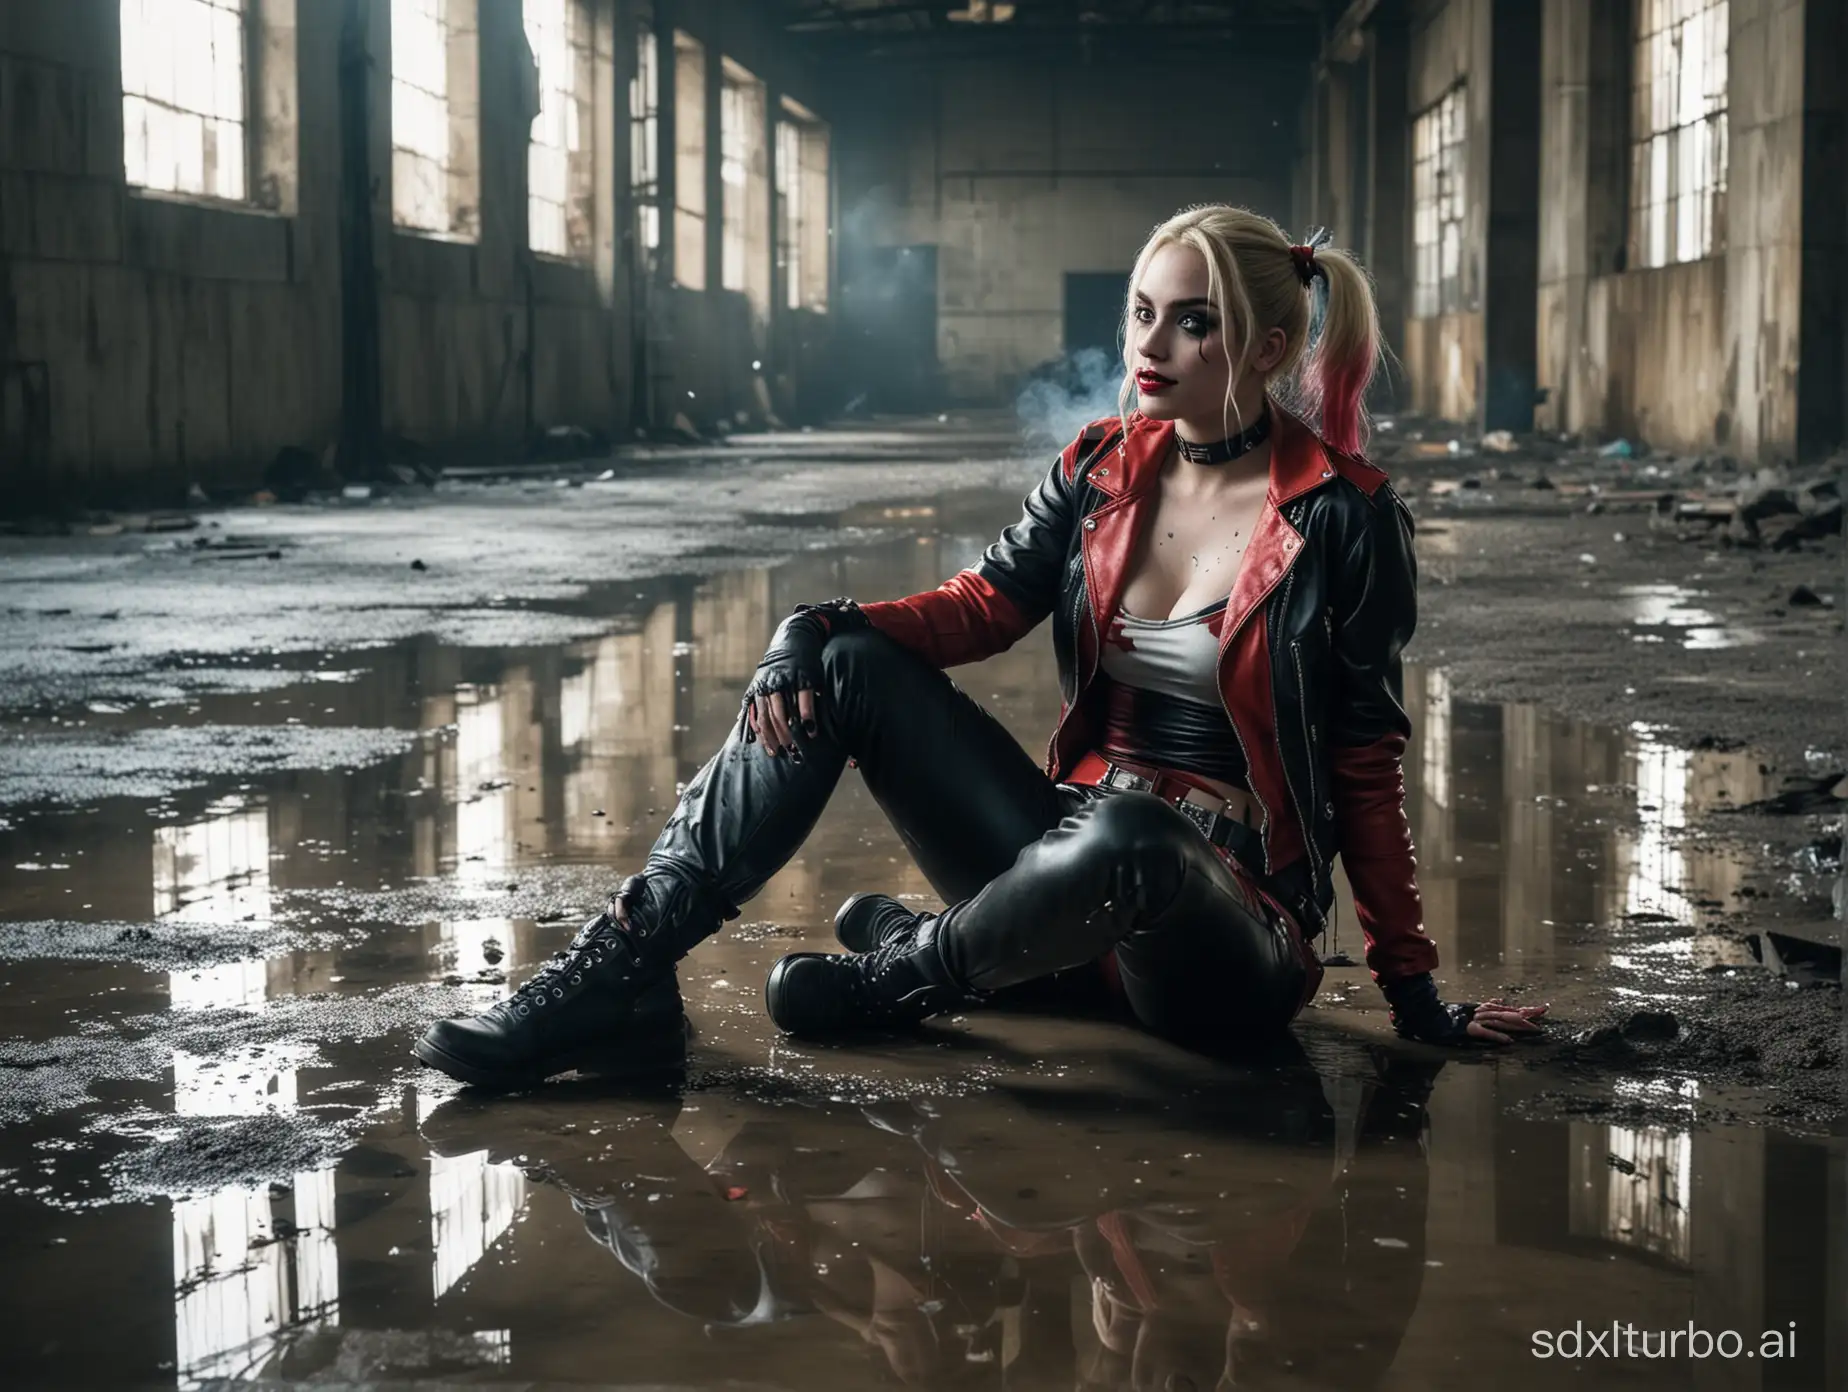 Harley Quinn, sitting on the floor smoking, in an abandoned warehouse, with puddles of water on the floor, reflections in the water